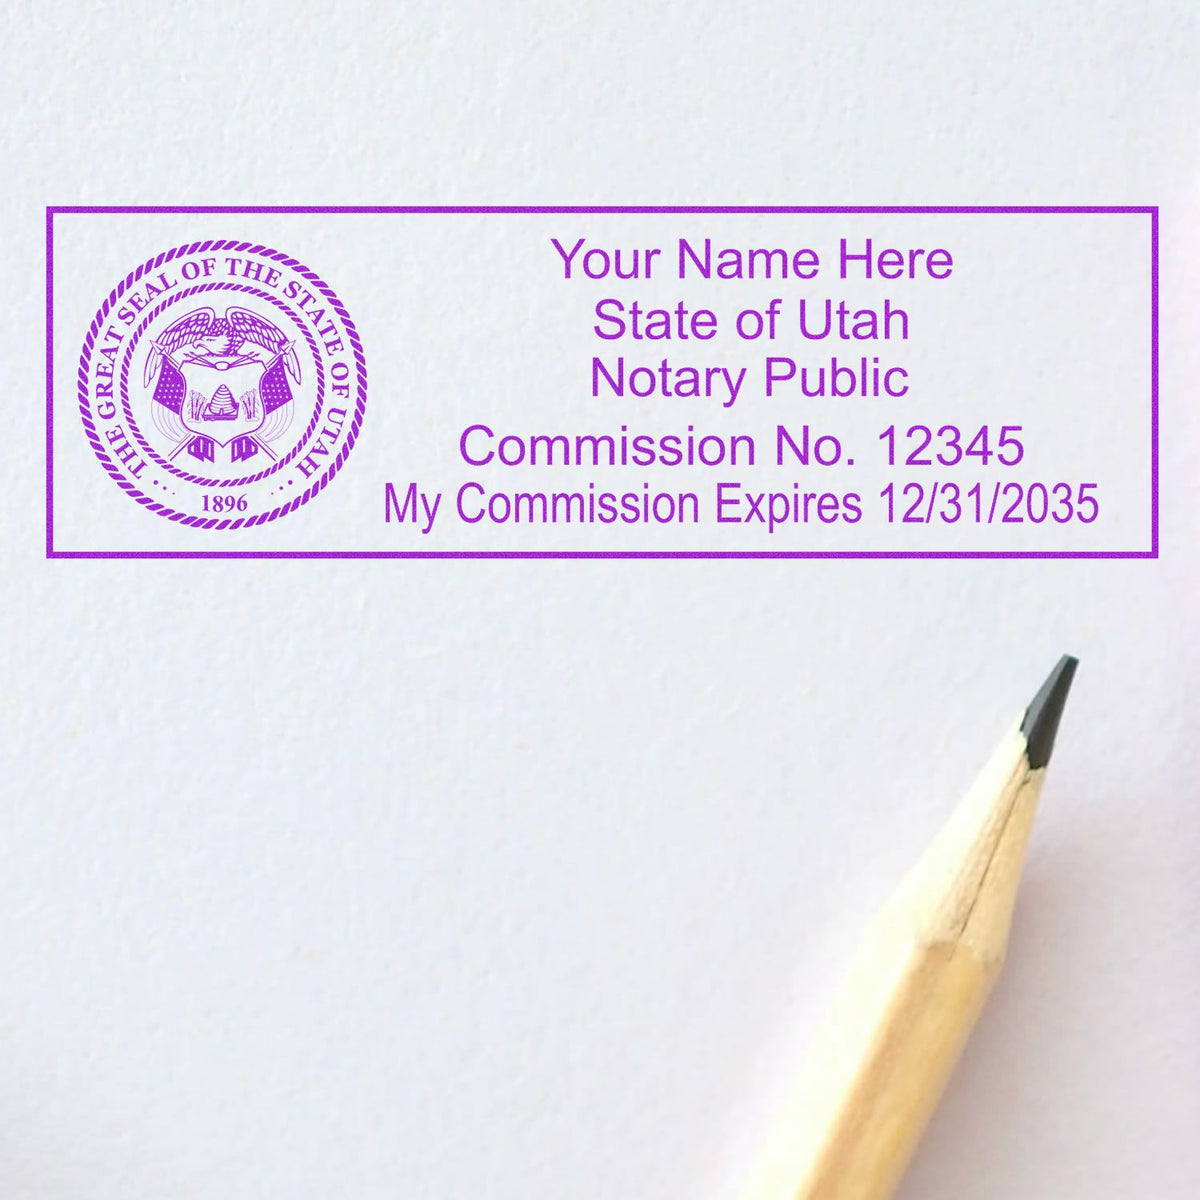 A photograph of the MaxLight Premium Pre-Inked Utah State Seal Notarial Stamp stamp impression reveals a vivid, professional image of the on paper.